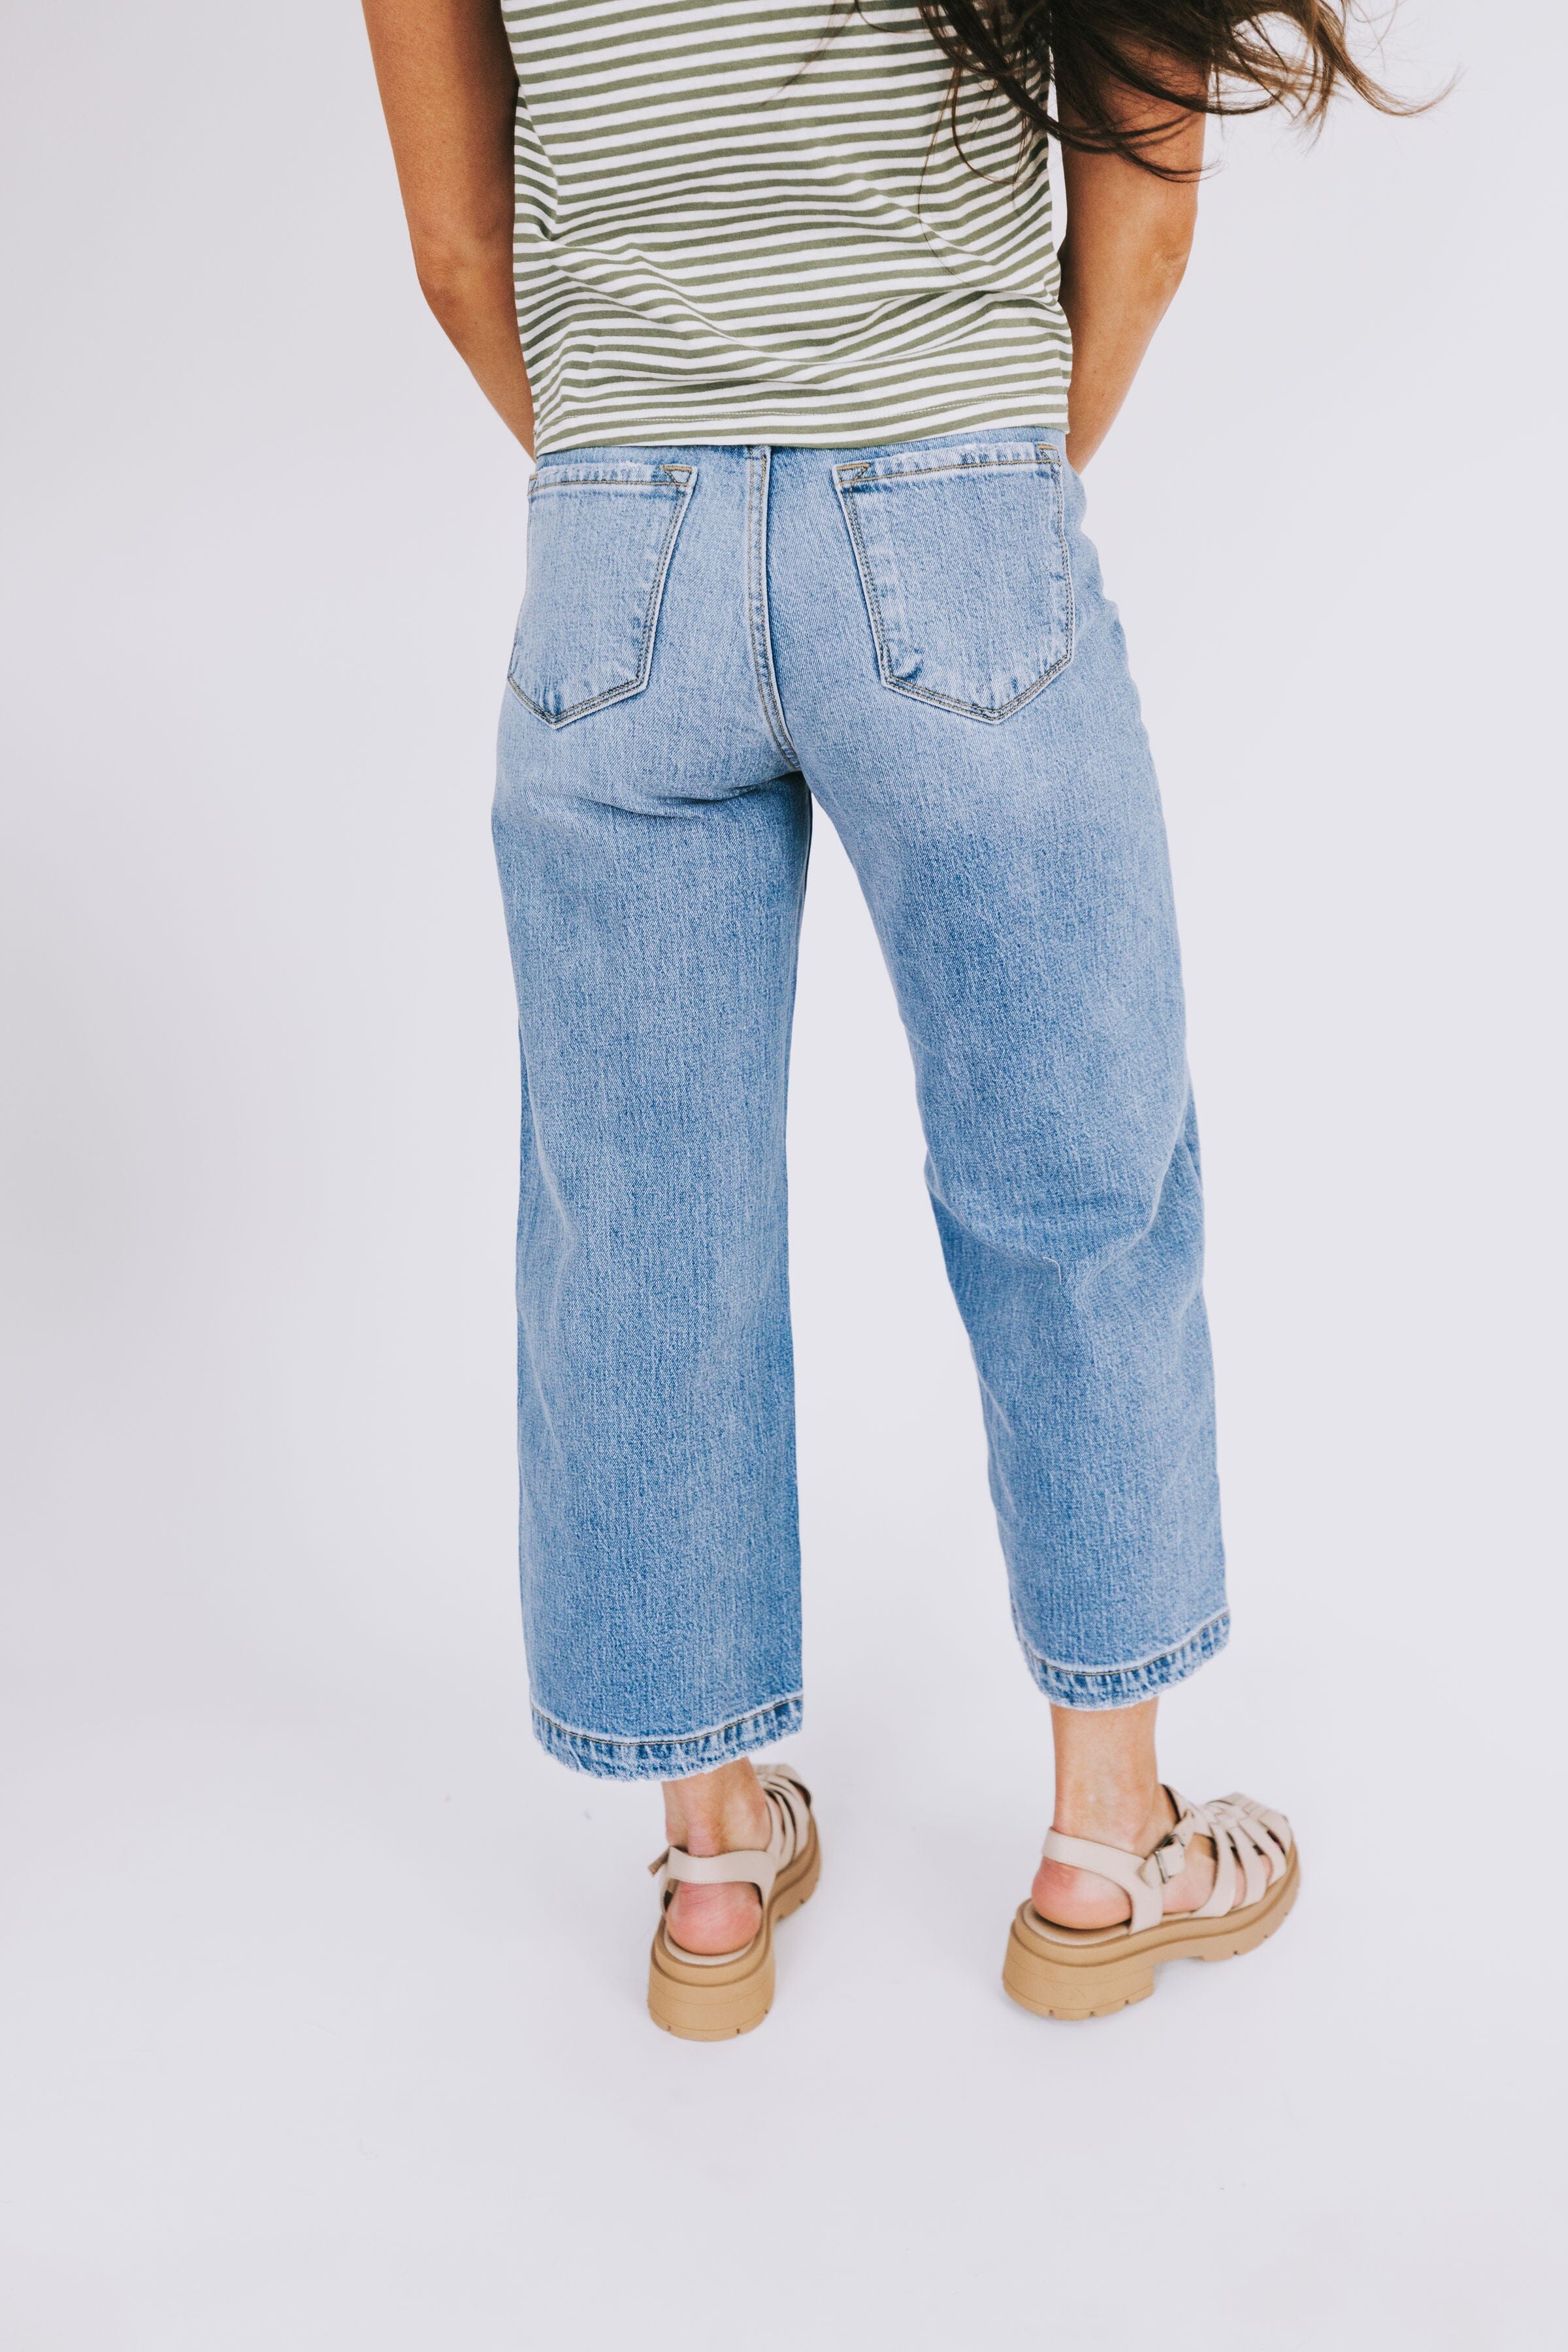 KanCan Another Story Jeans